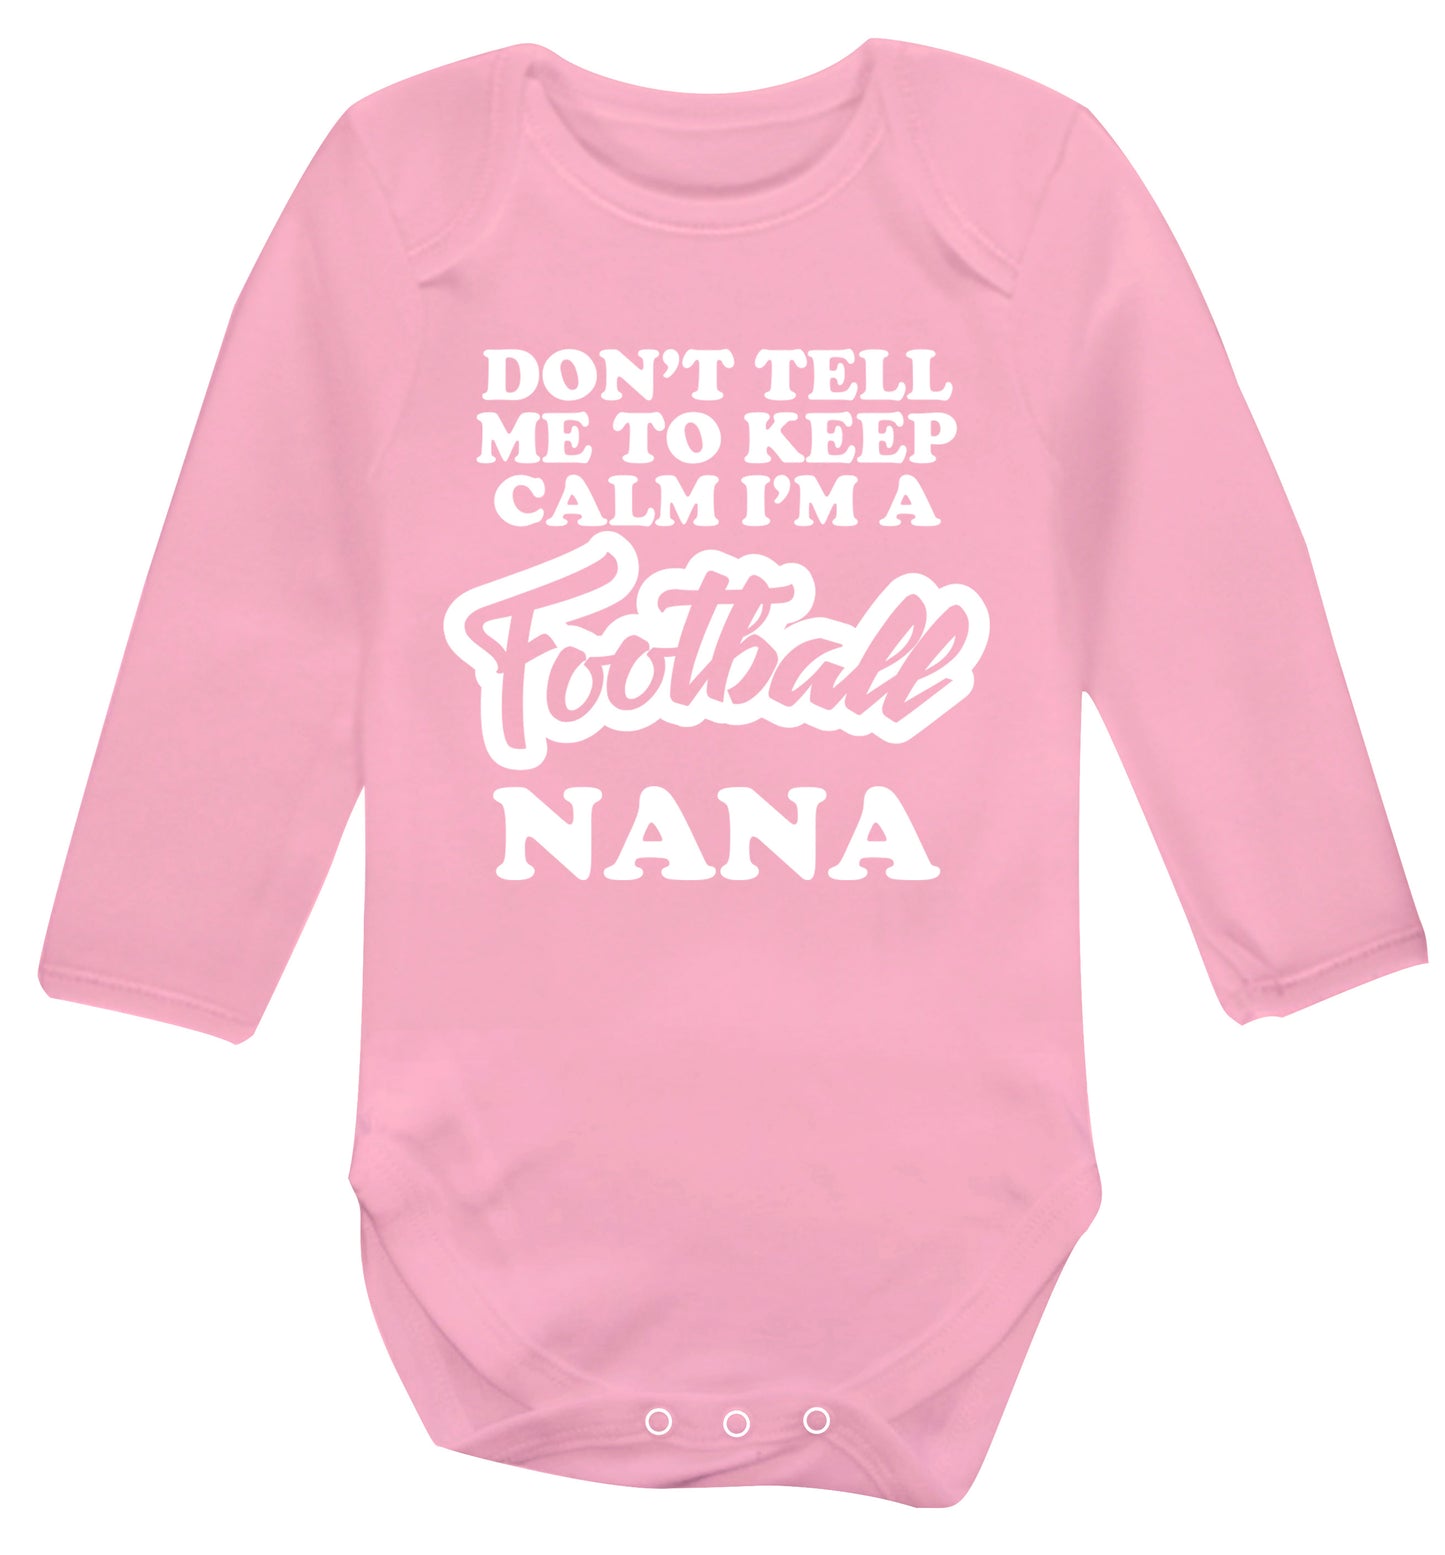 Don't tell me to keep calm I'm a football nana Baby Vest long sleeved pale pink 6-12 months